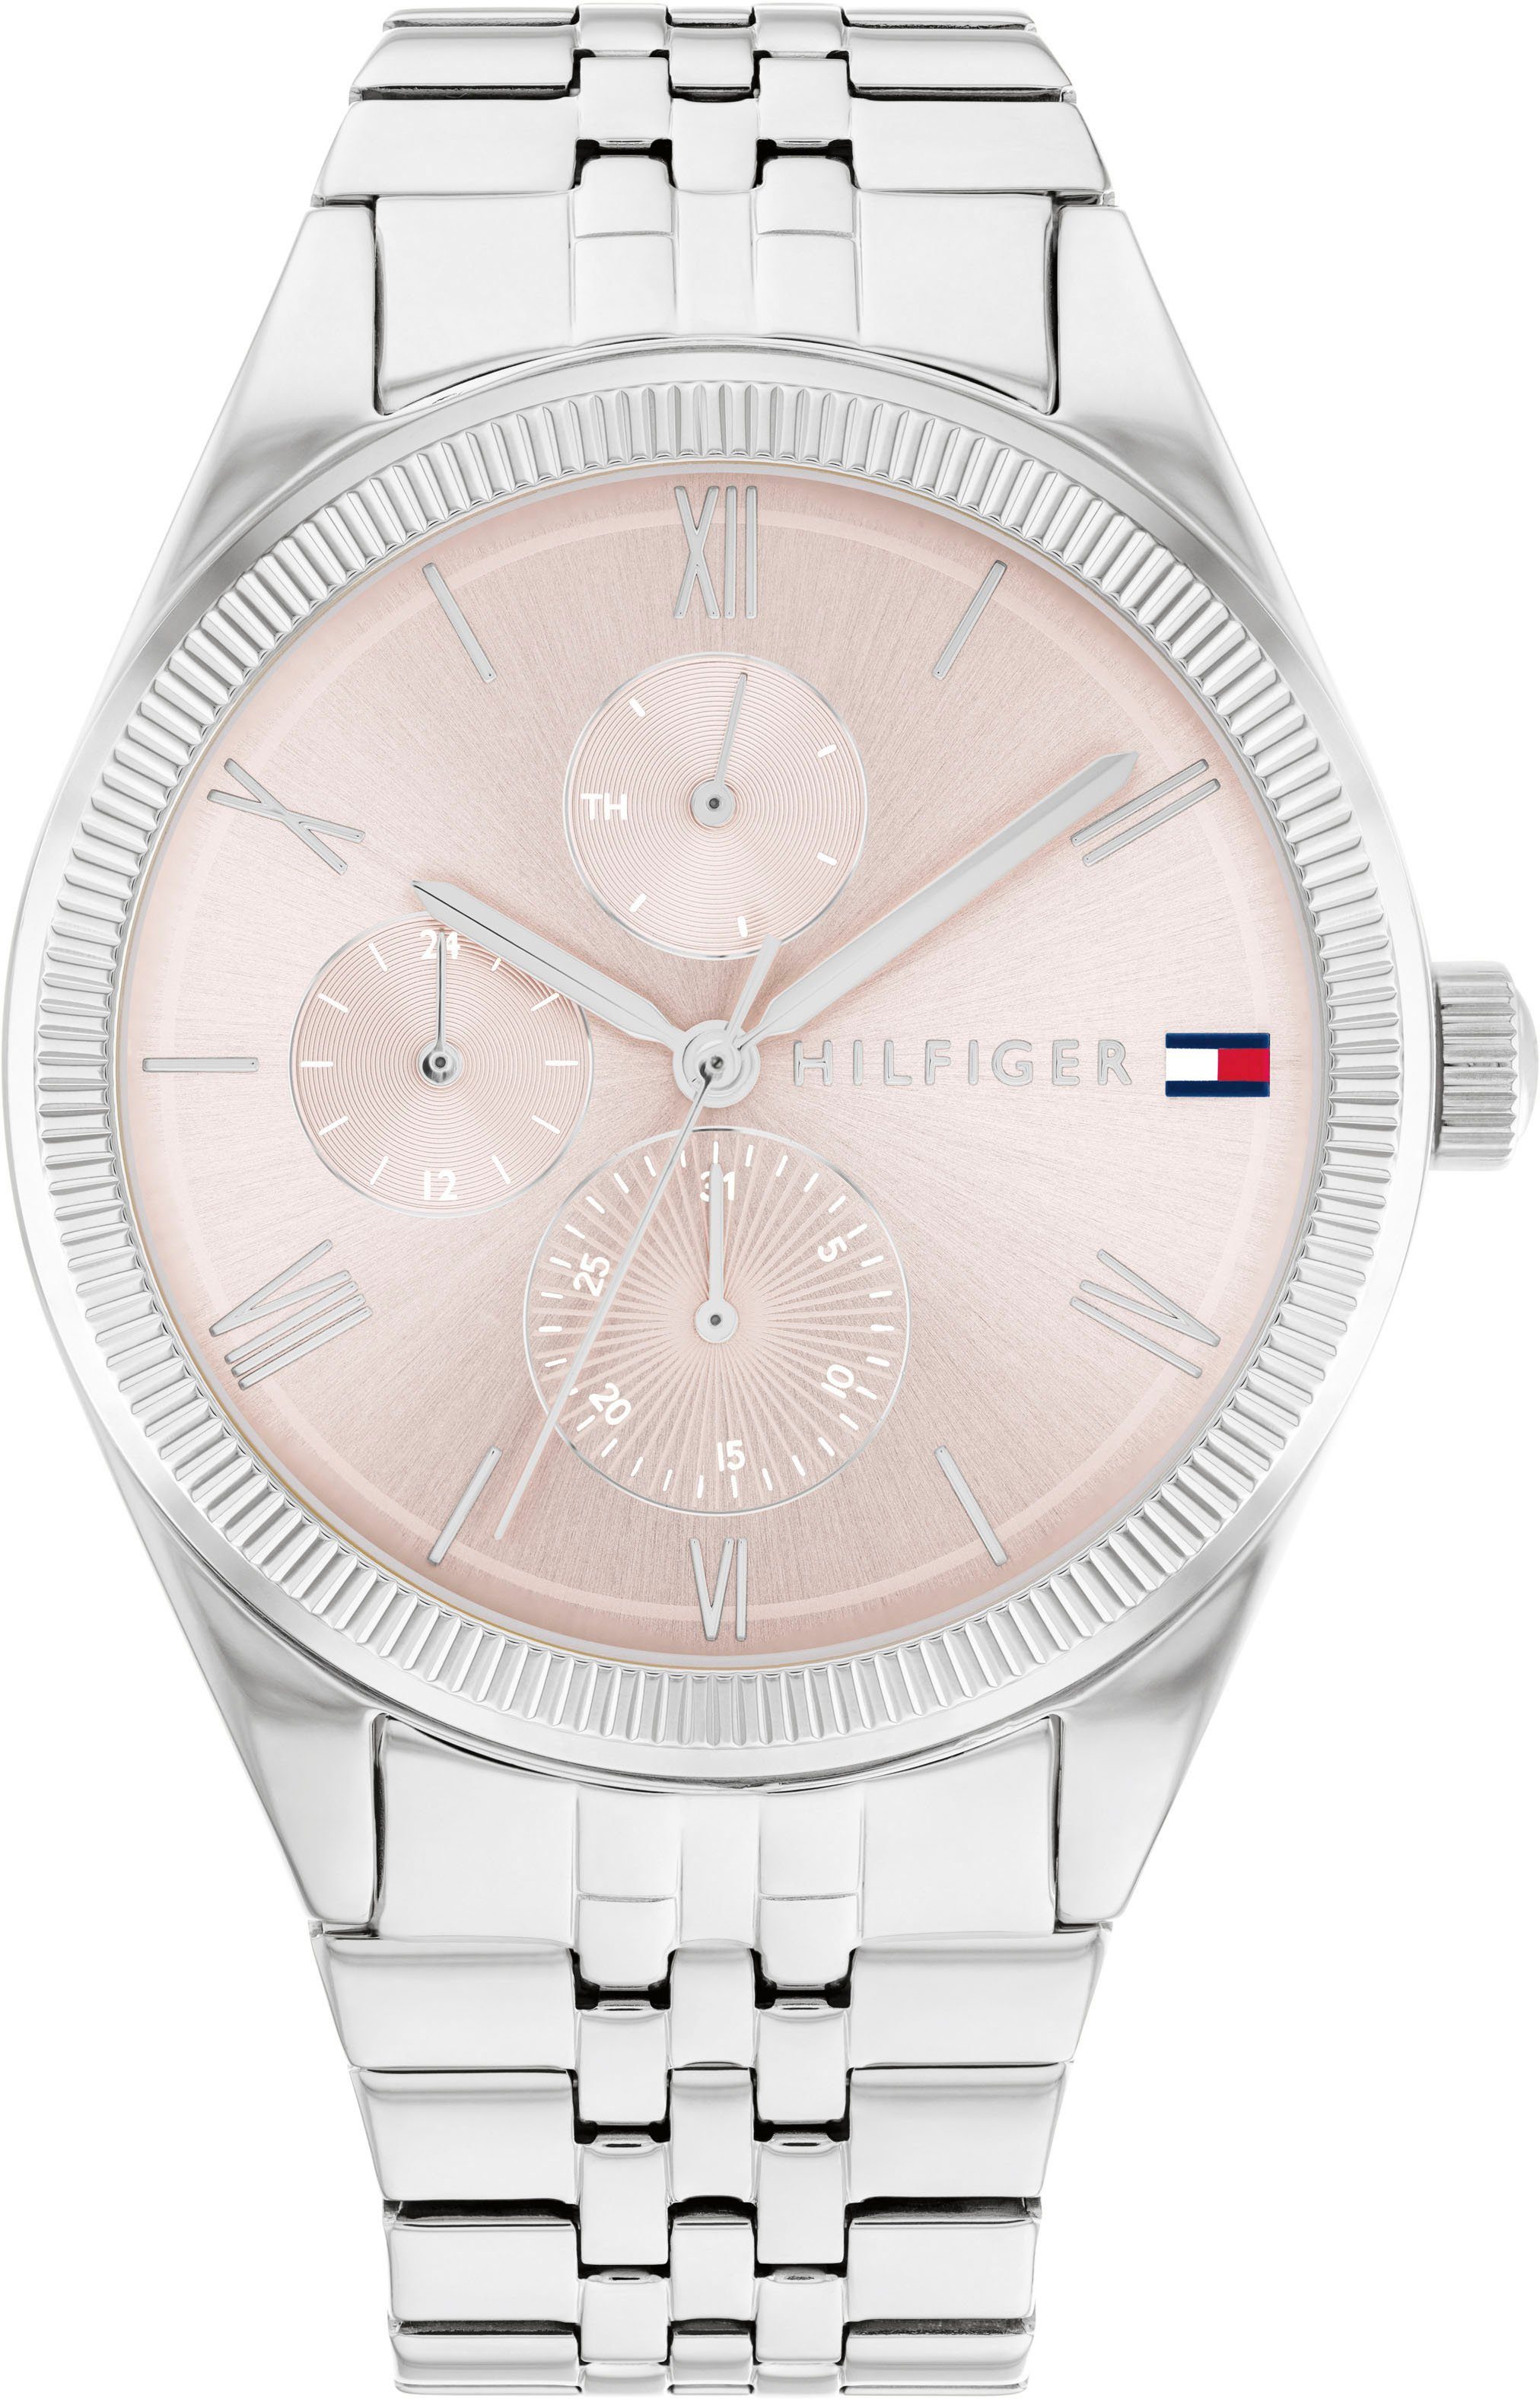 CLASSIC, Tommy Hilfiger 1782590 Multifunktionsuhr